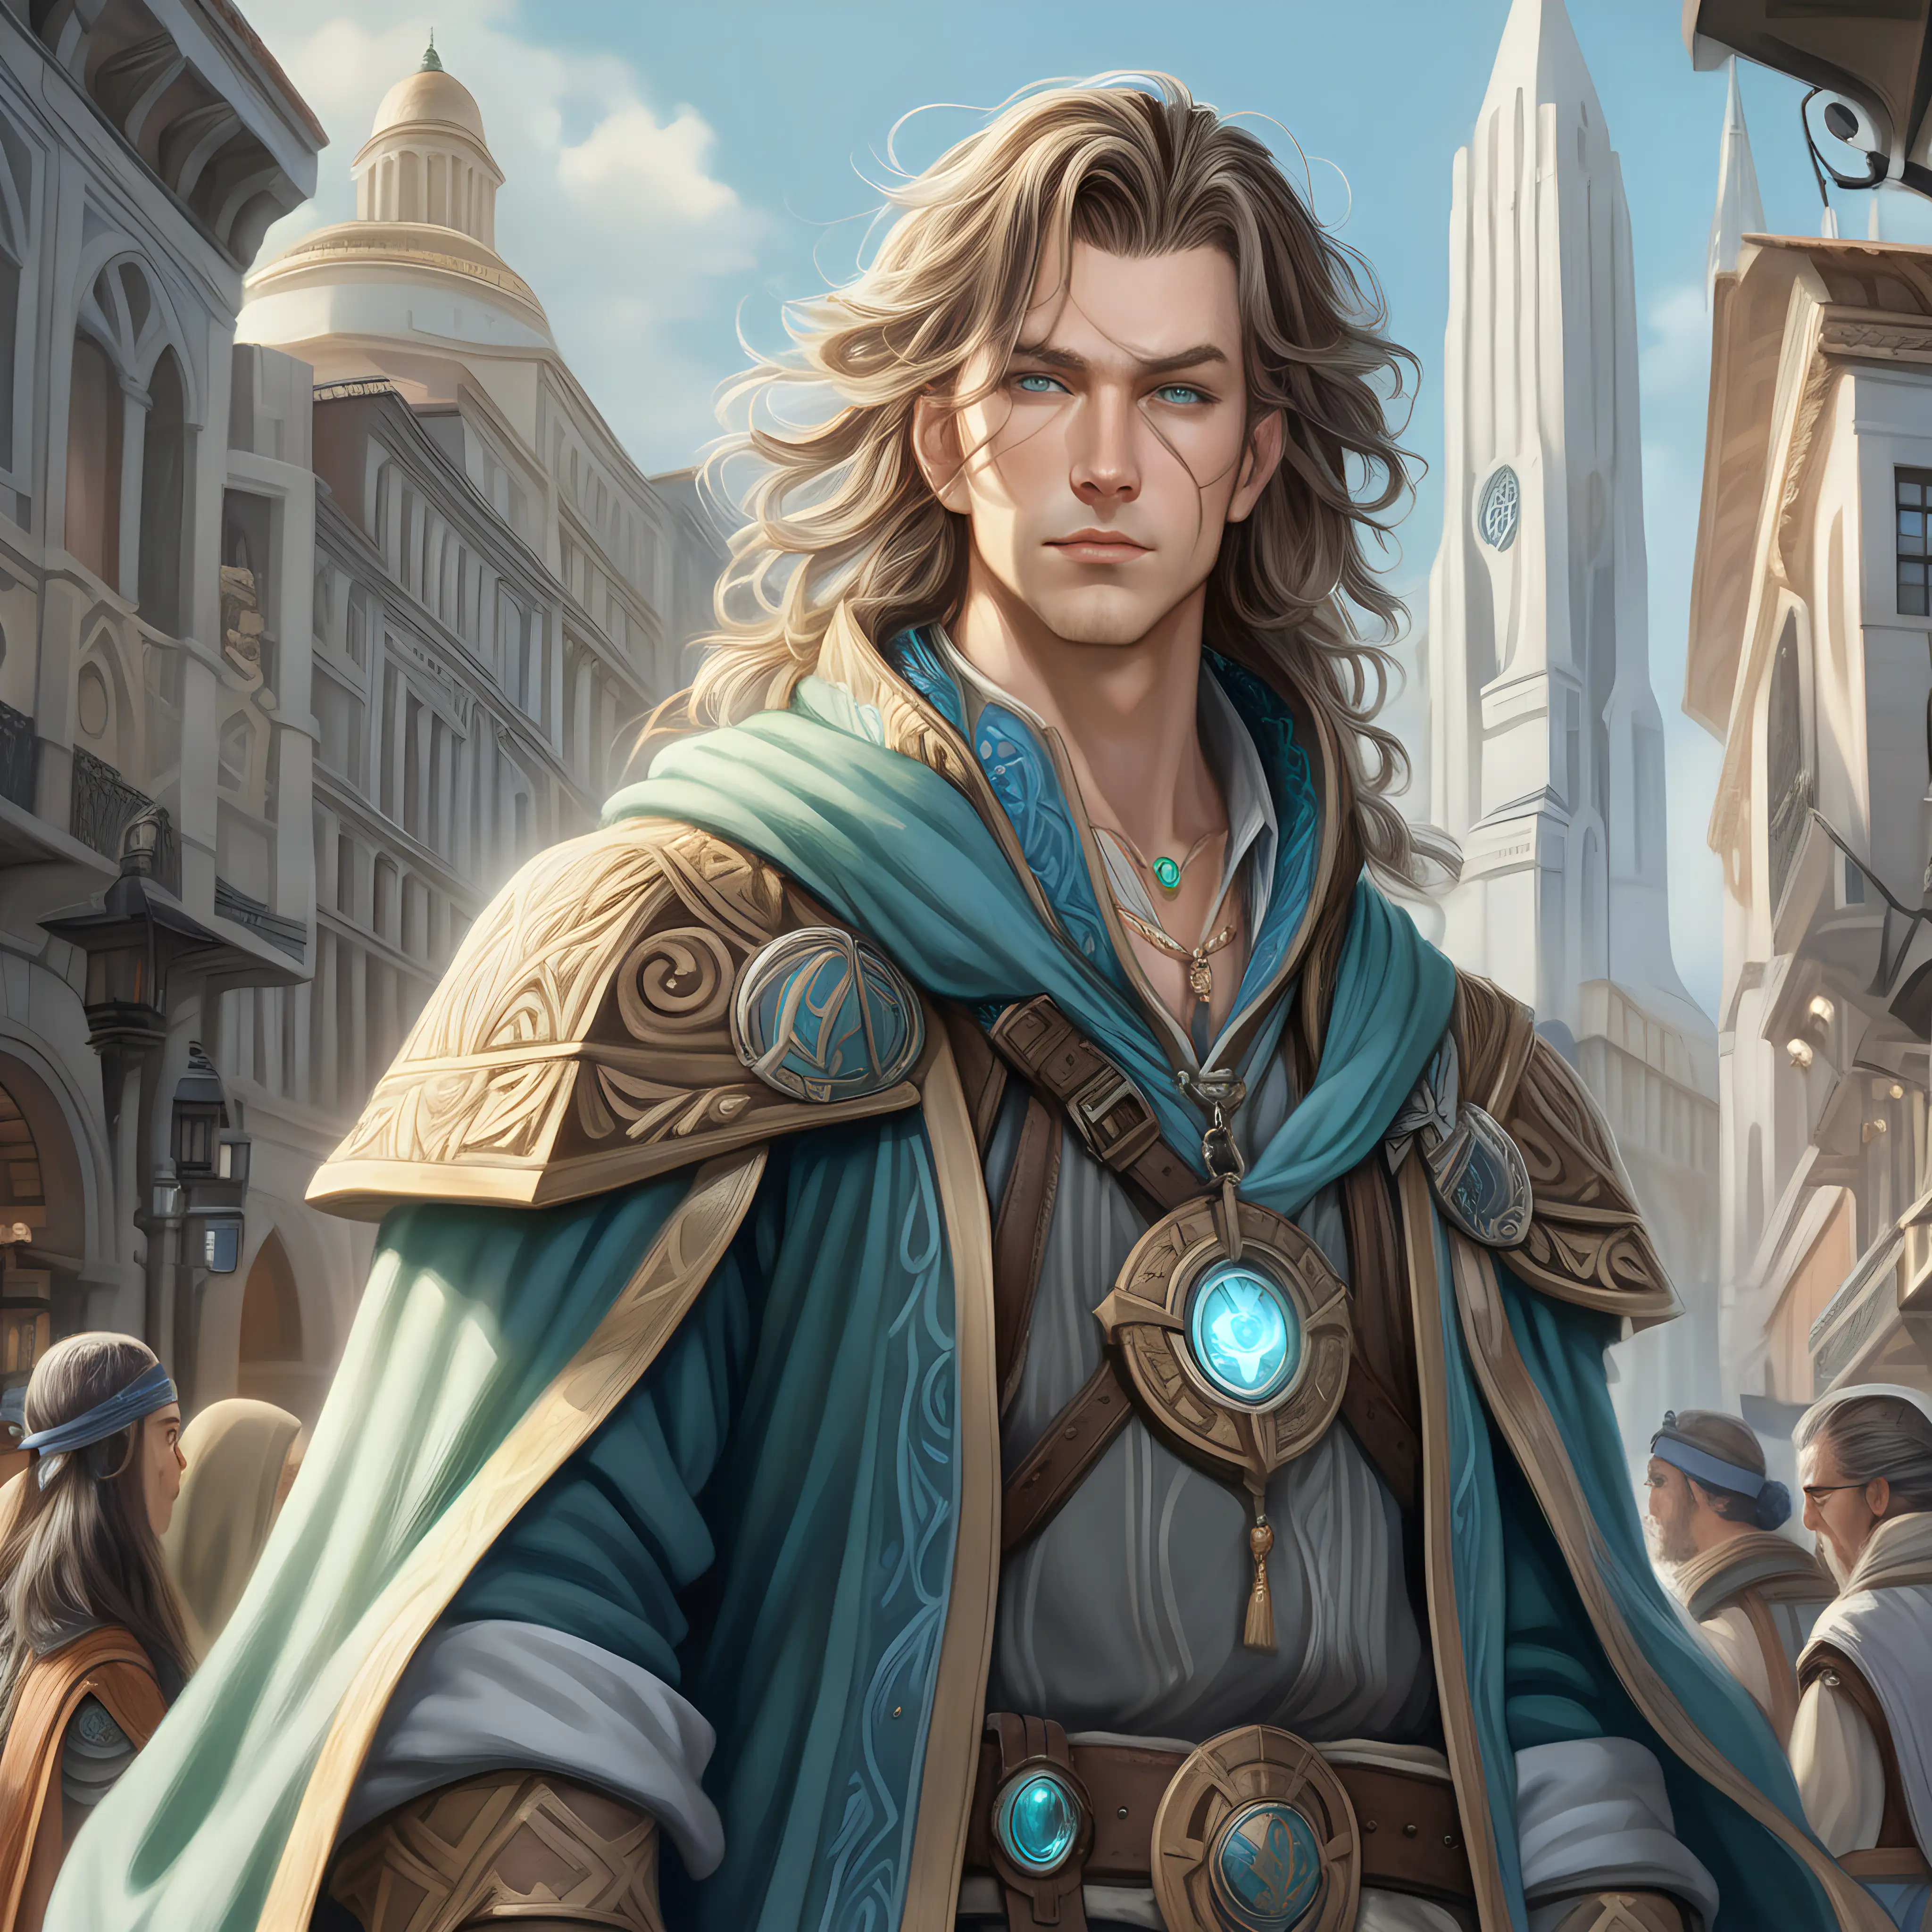 A 27-year old lithe man of age stands in the middle of a bustling city, he is clean-shaven with pale skin. He has medium-length wavy hair with a braid, adorned in simple accessories. His eyes are pallid, unseeing. His attire consists of a mix of rugged adventurer's gear and elements of mystical robes, including a long, flowing cloak and intricately designed armor pieces that hint at his arcane abilities. Around his neck, he wears a prominent, ancient amulet, glowing subtly. 